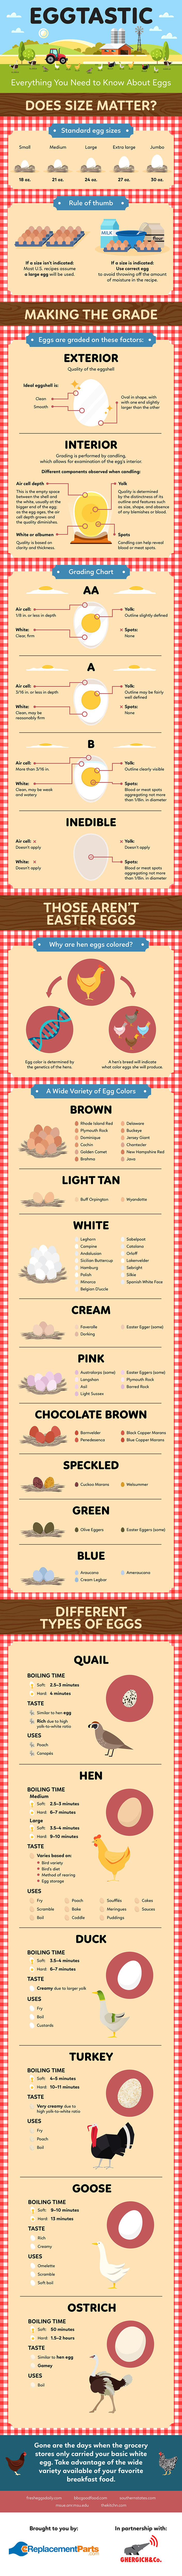 Everything You Need to Know About Eggs - Cooking Infographic